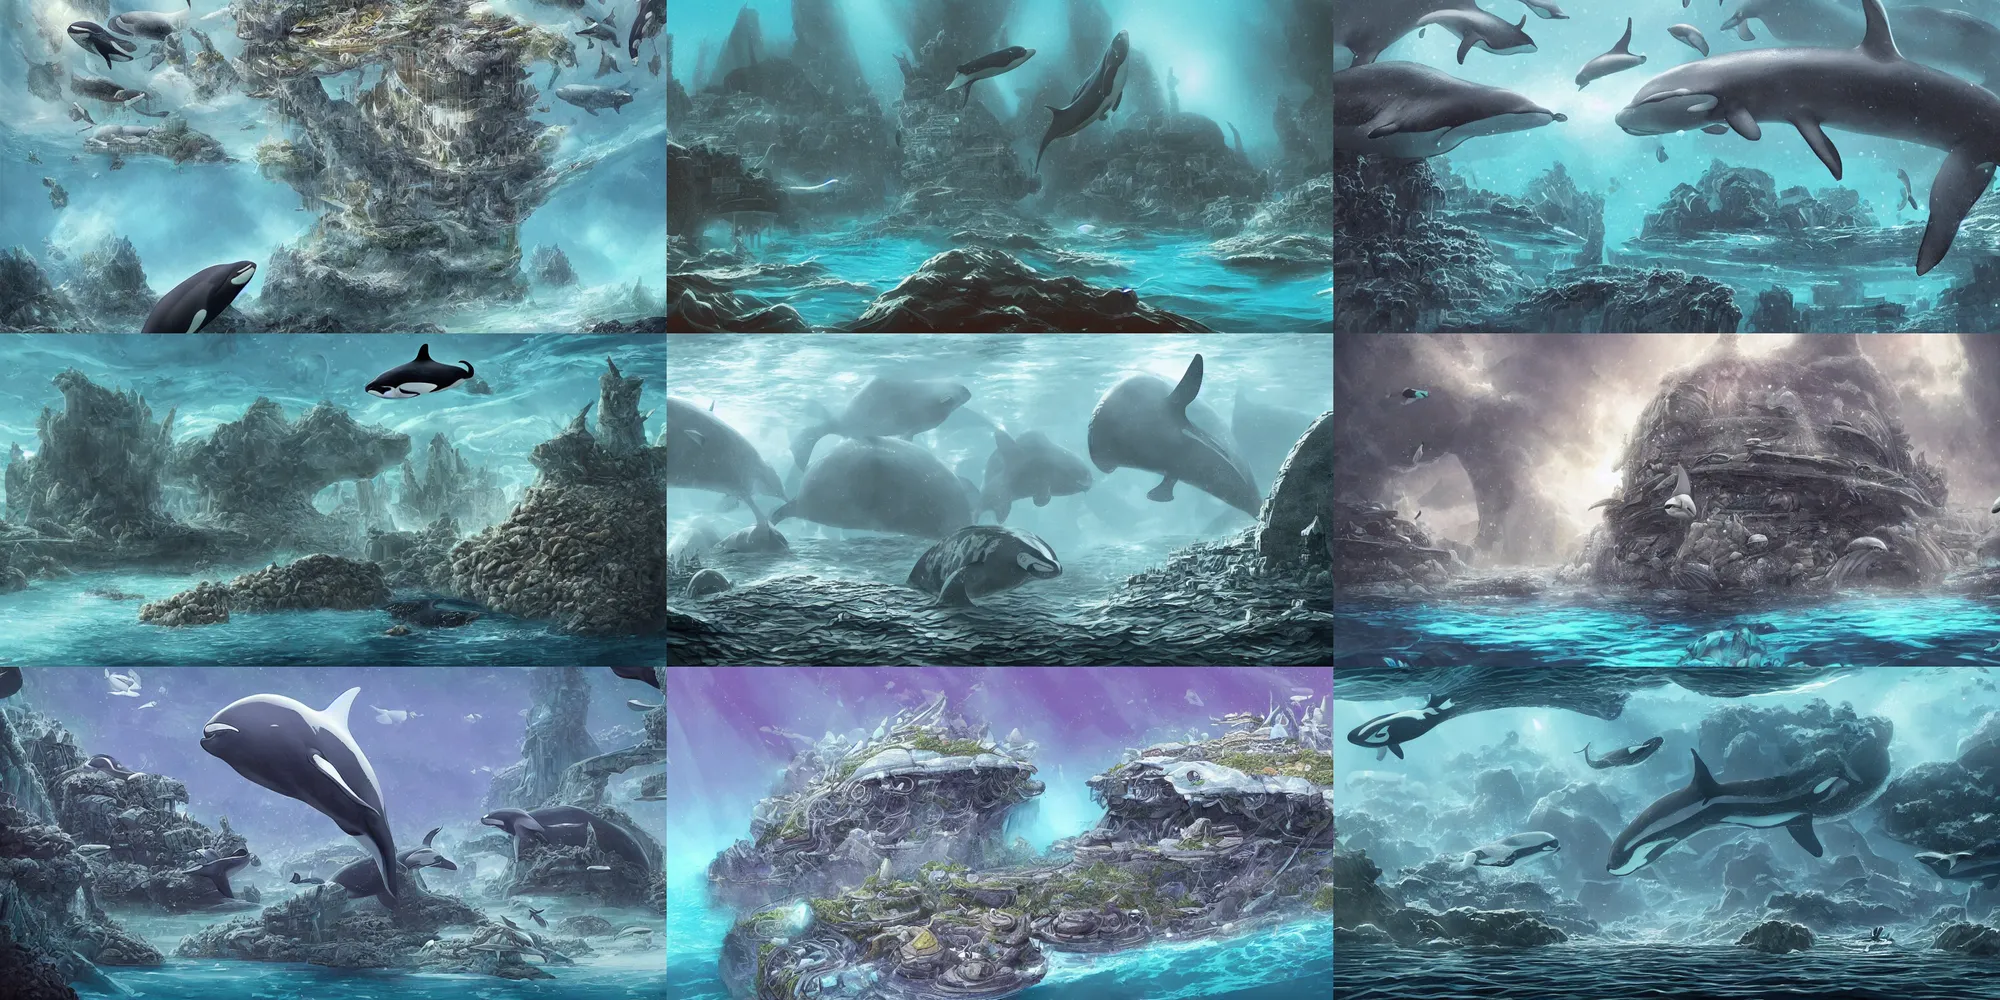 Image similar to civilization underwater created by orcas, submerged city made with coral and rock by killer whales, fantasy scifi illustration